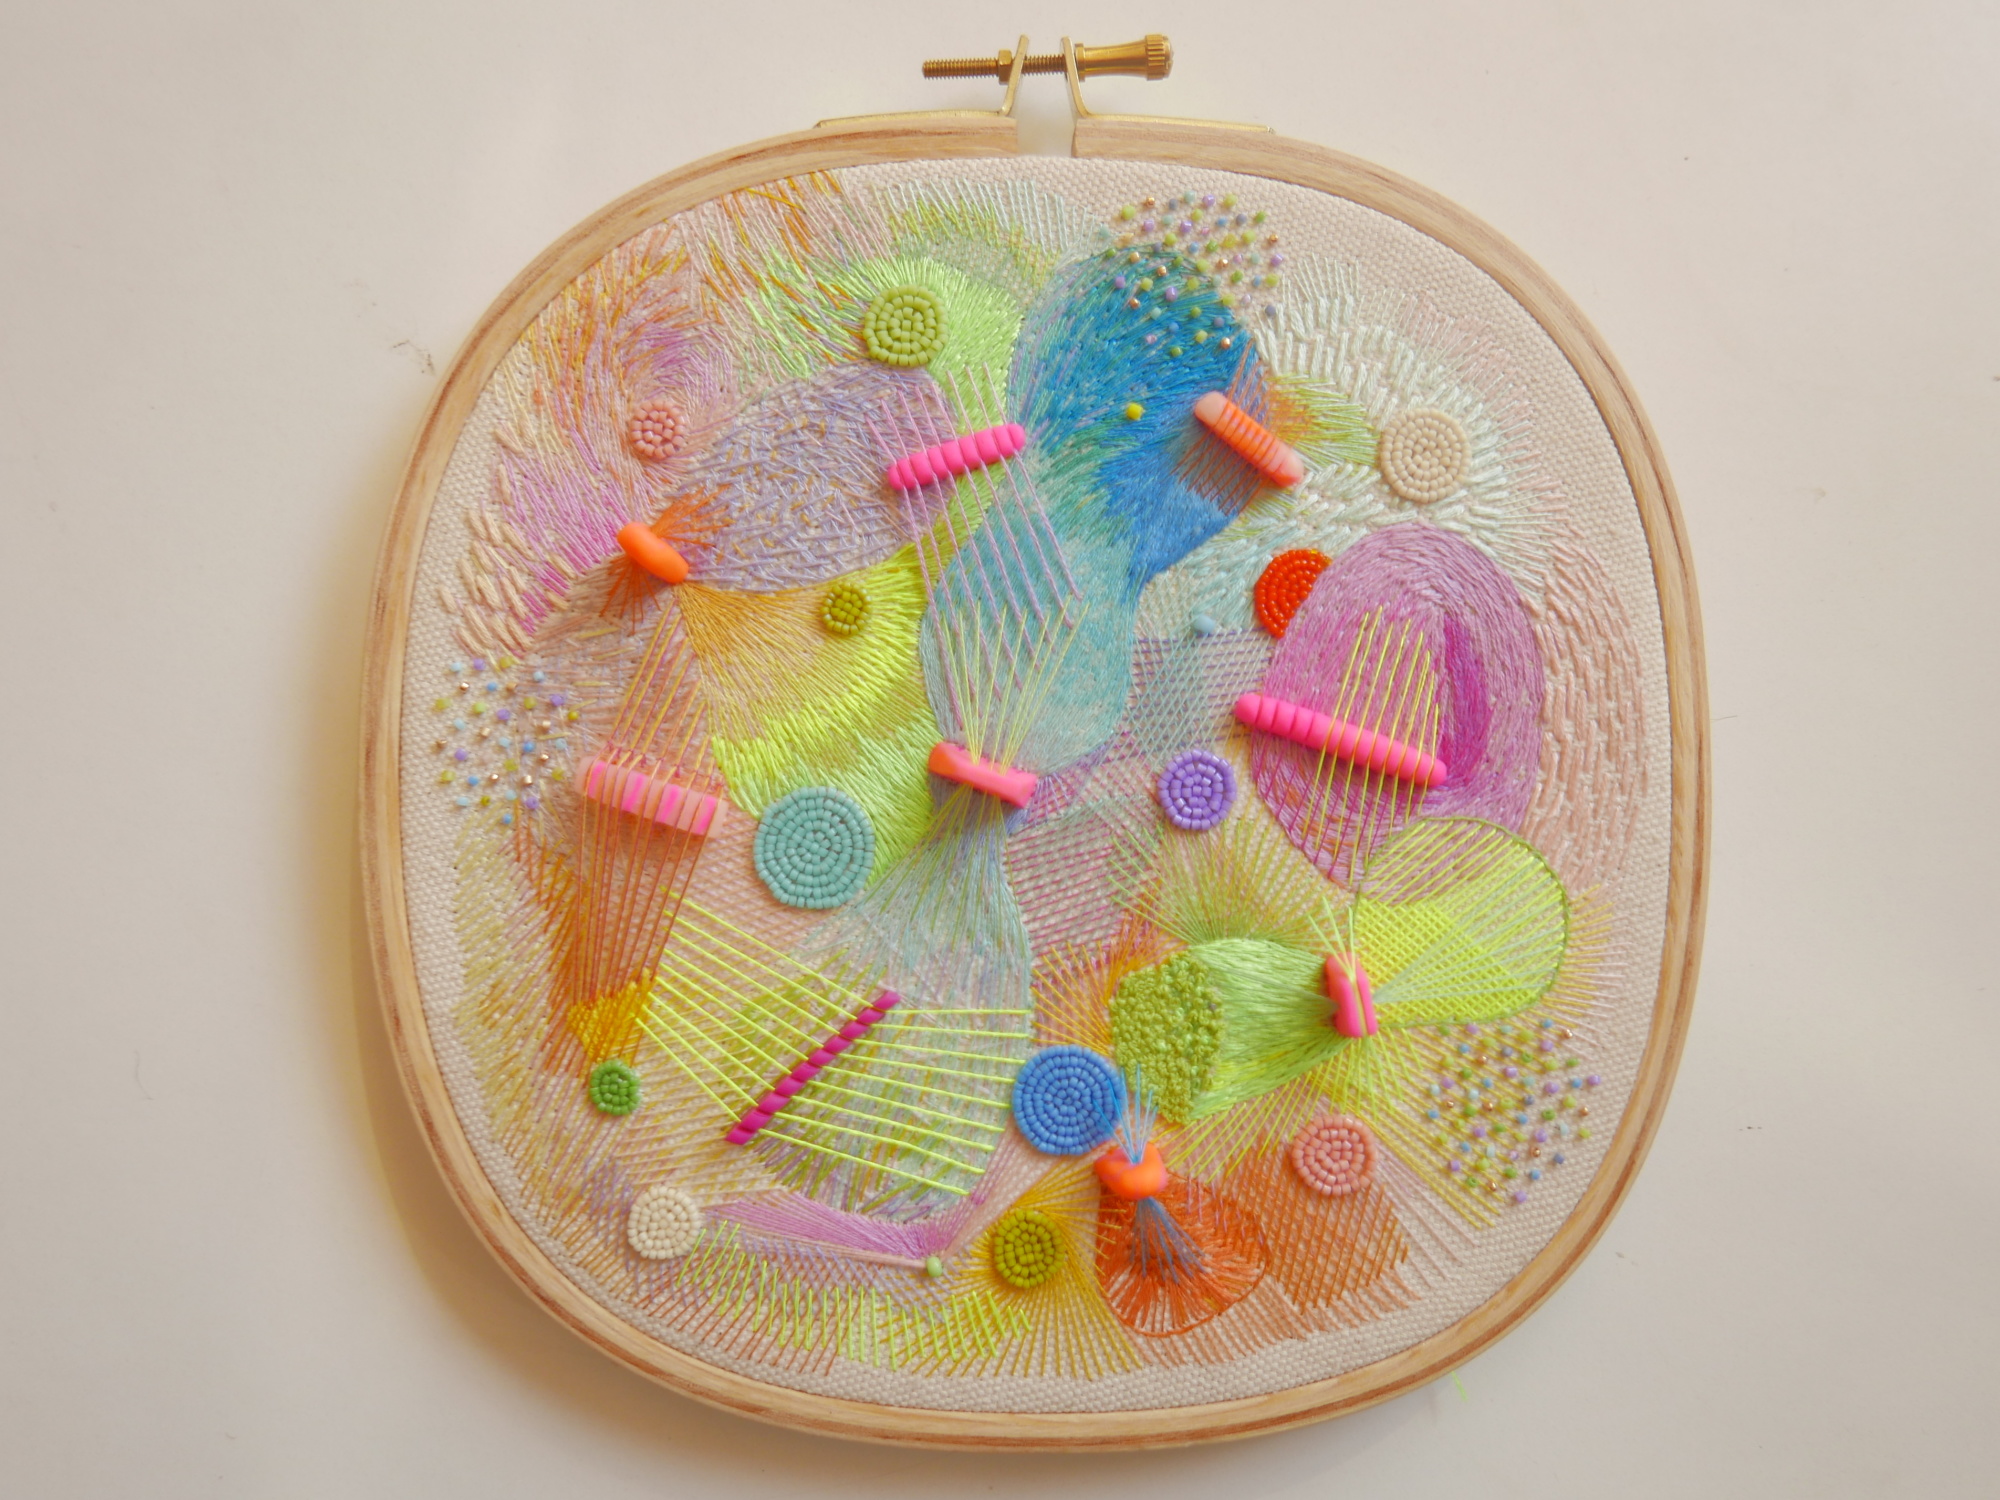 Full view of hand embroidery